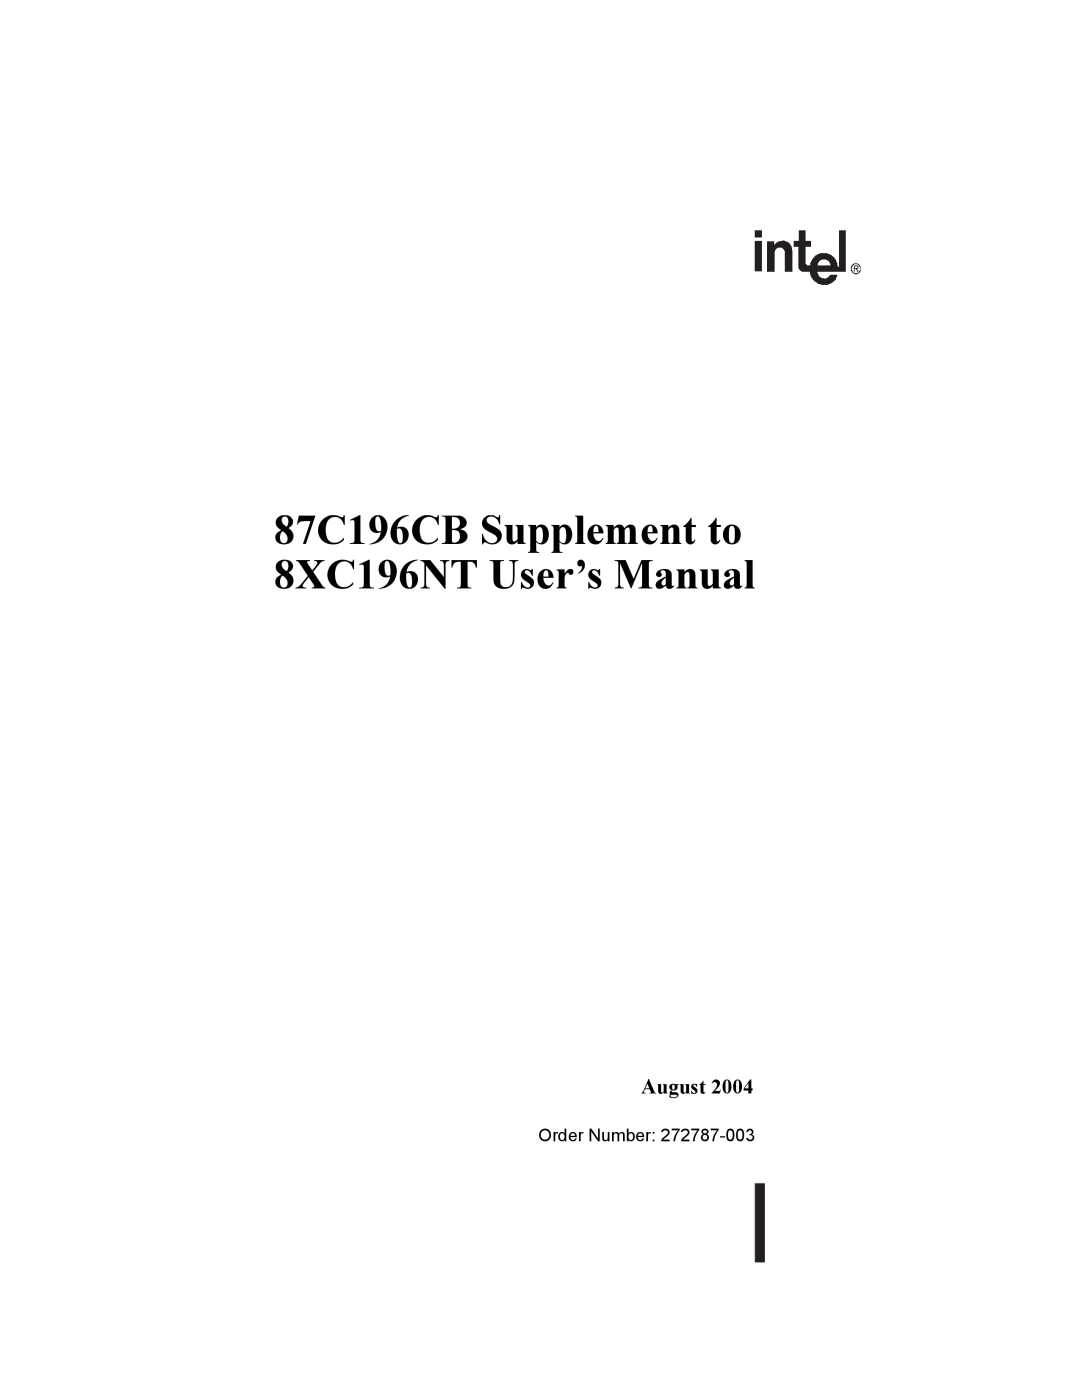 Intel user manual 87C196CB Supplement to 8XC196NT User’s Manual, August, Order Number 